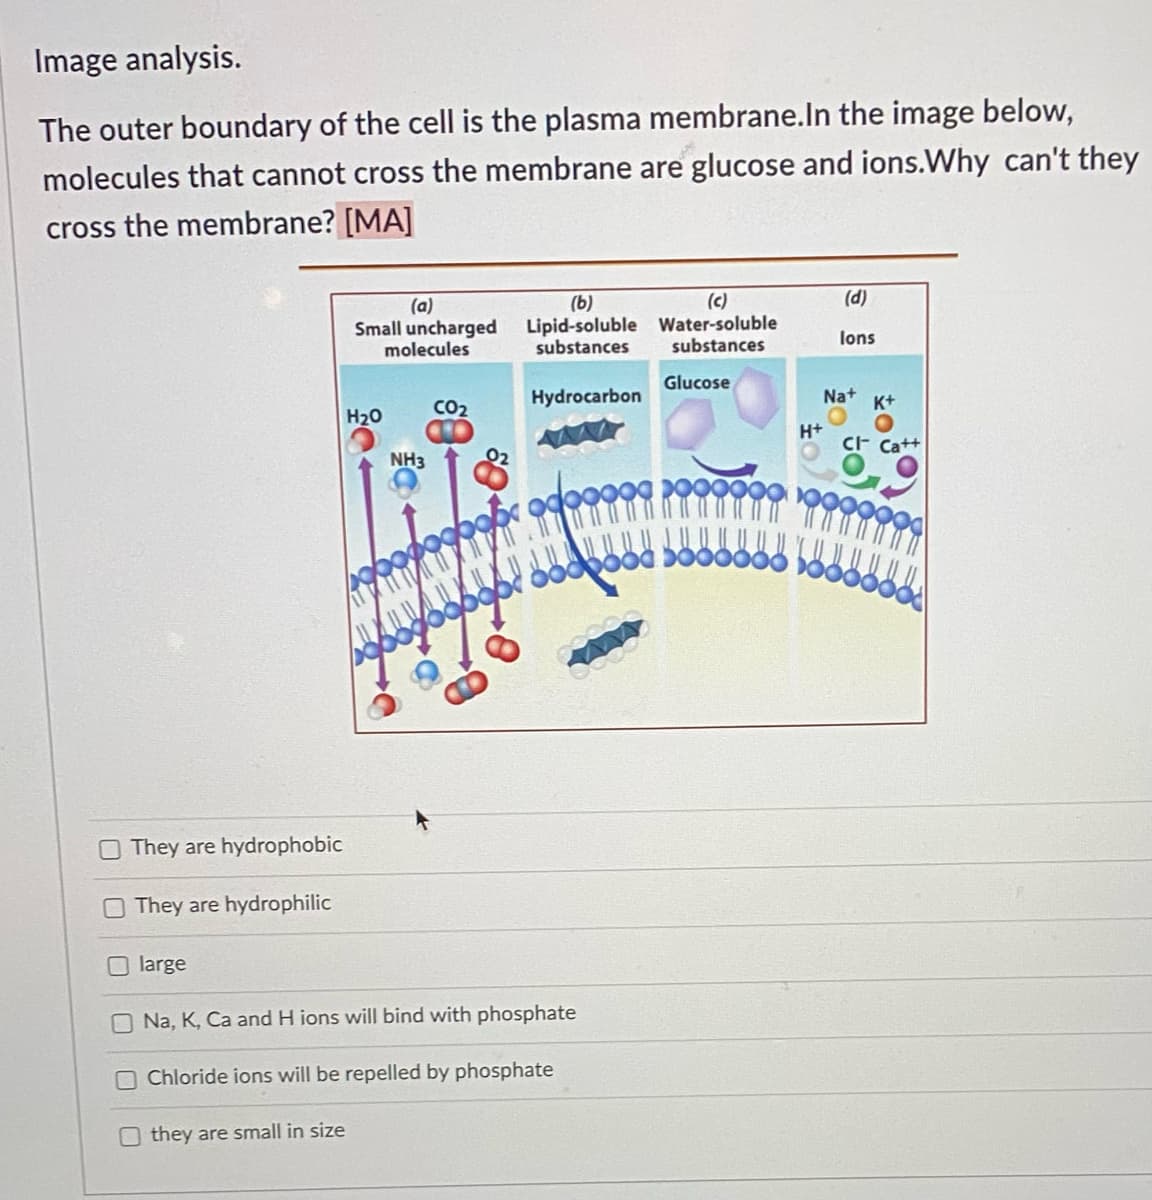 Image analysis.
The outer boundary of the cell is the plasma membrane.In the image below,
molecules that cannot cross the membrane are glucose and ions.Why can't they
cross the membrane? [MA]
(c)
(d)
(a)
Small uncharged
molecules
(b)
Lipid-soluble Water-soluble
substances
lons
substances
Glucose
Hydrocarbon
Nat
K+
H20
CO2
H+
cF Cat+
NH3
O They are hydrophobic
O They are hydrophilic
O large
O Na, K, Ca and H ions will bind with phosphate
Chloride ions will be repelled by phosphate
they are small in size
to
